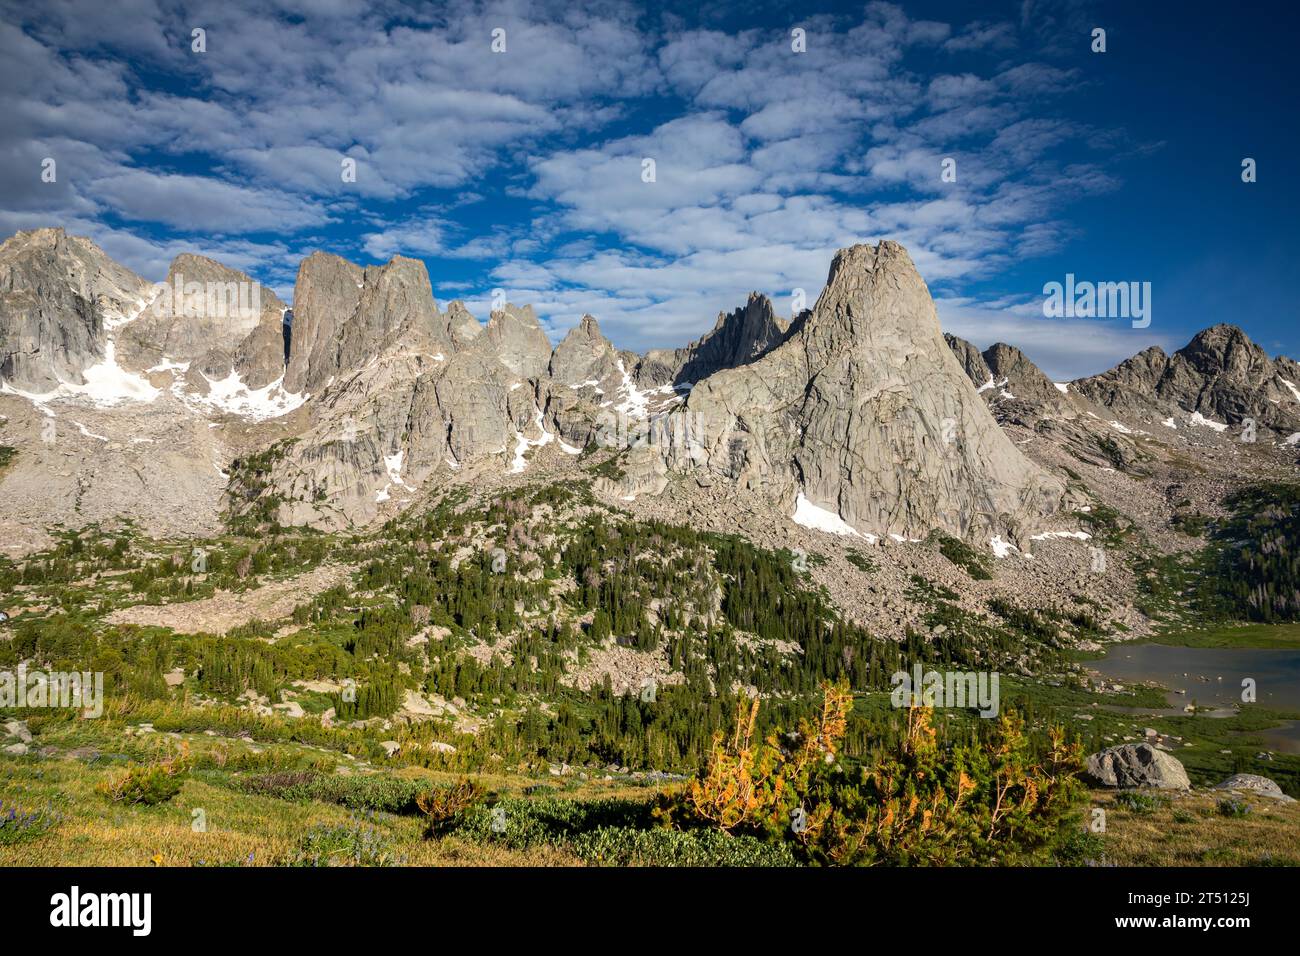 WY05598-00...WYOMING - Pingera Peak overlooking Lonesome Lake in the Cirque of the Towers in the Wind River Ranch. Stock Photo